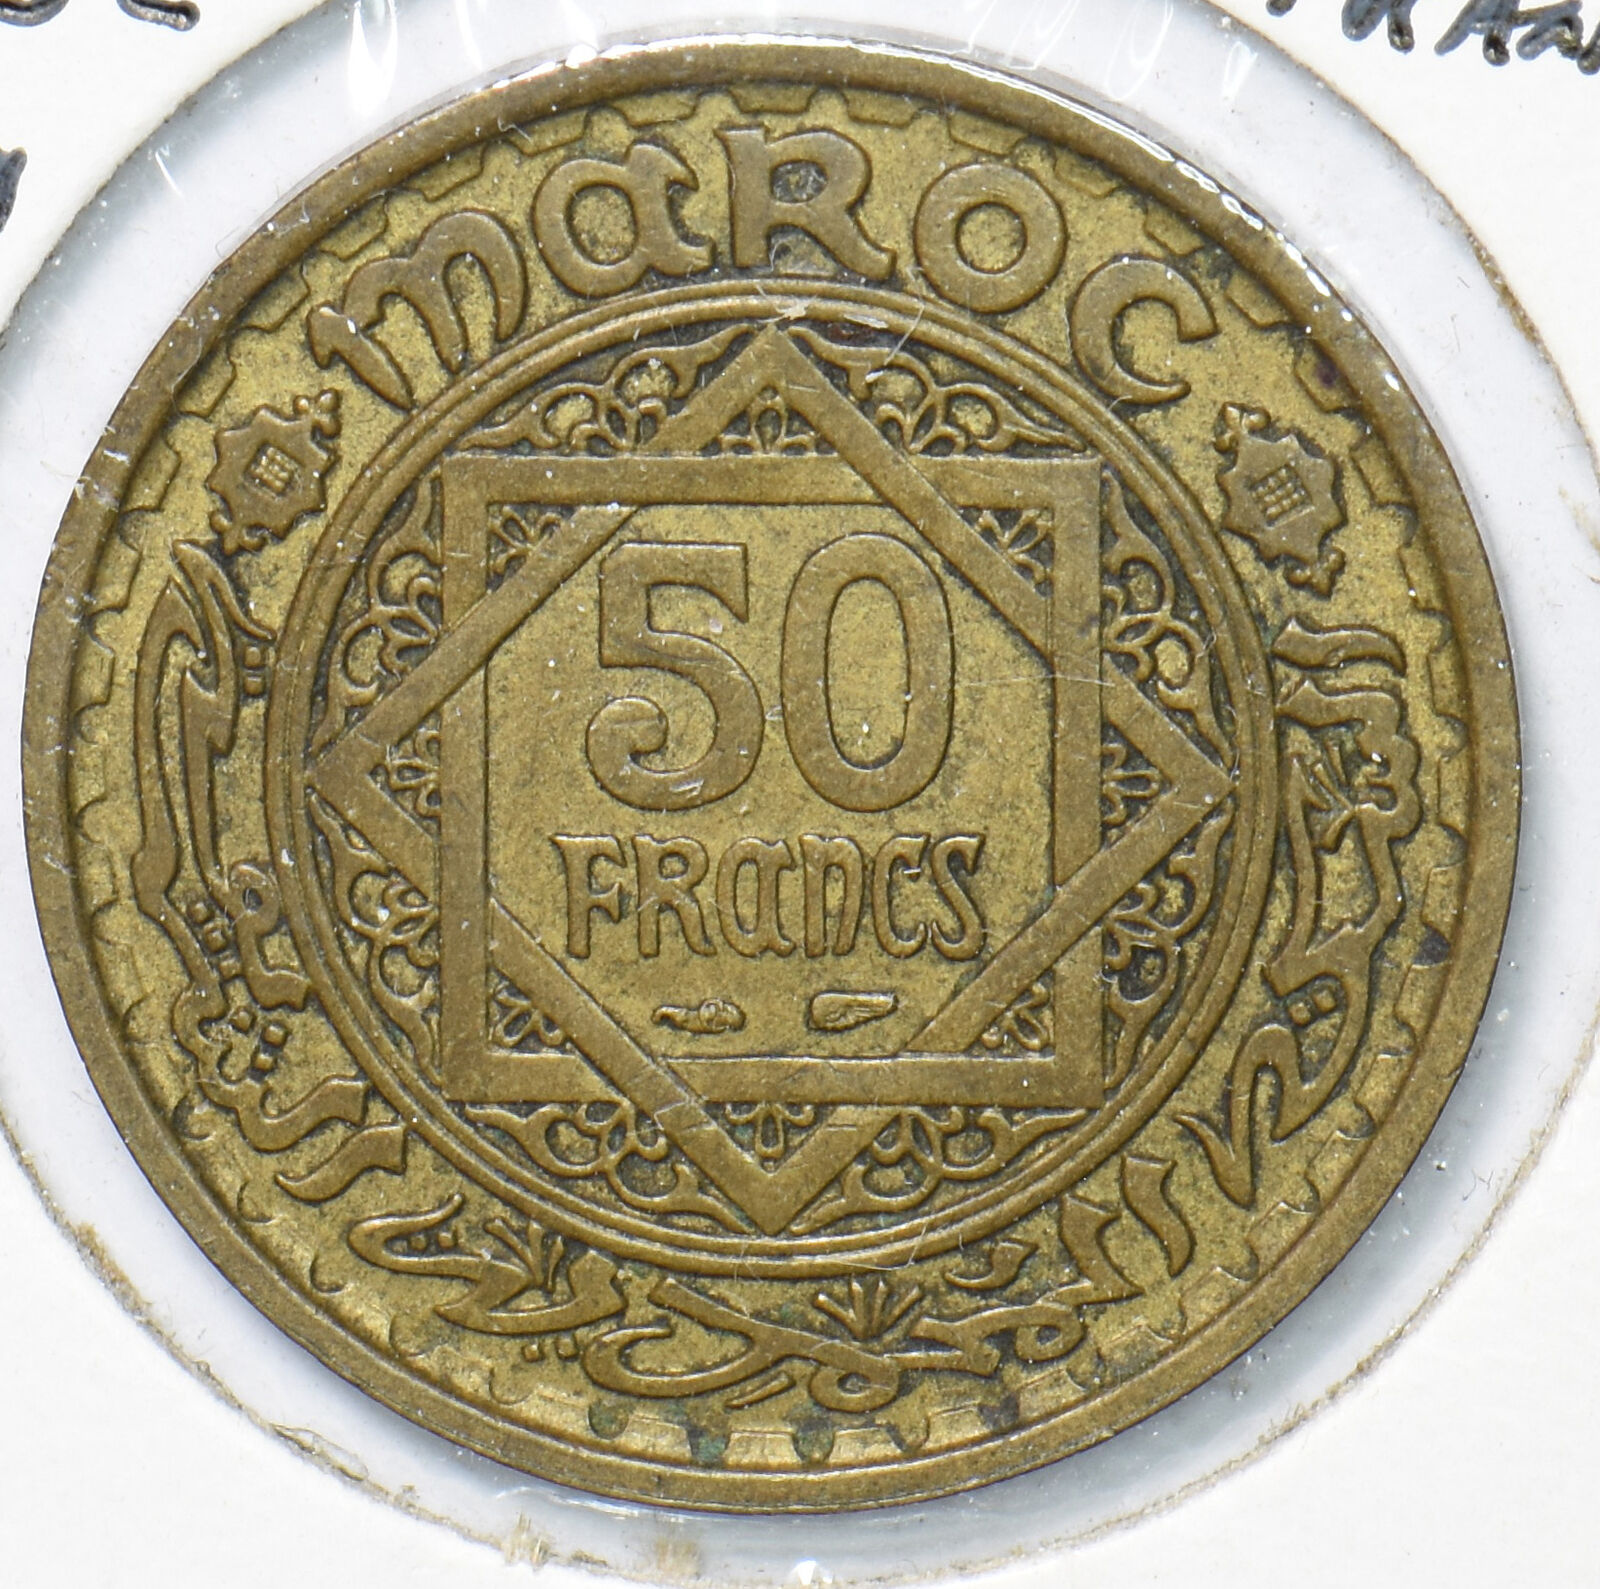 Morocco 1952 Ah 1371 50 Francs 901569 Combine Shipping